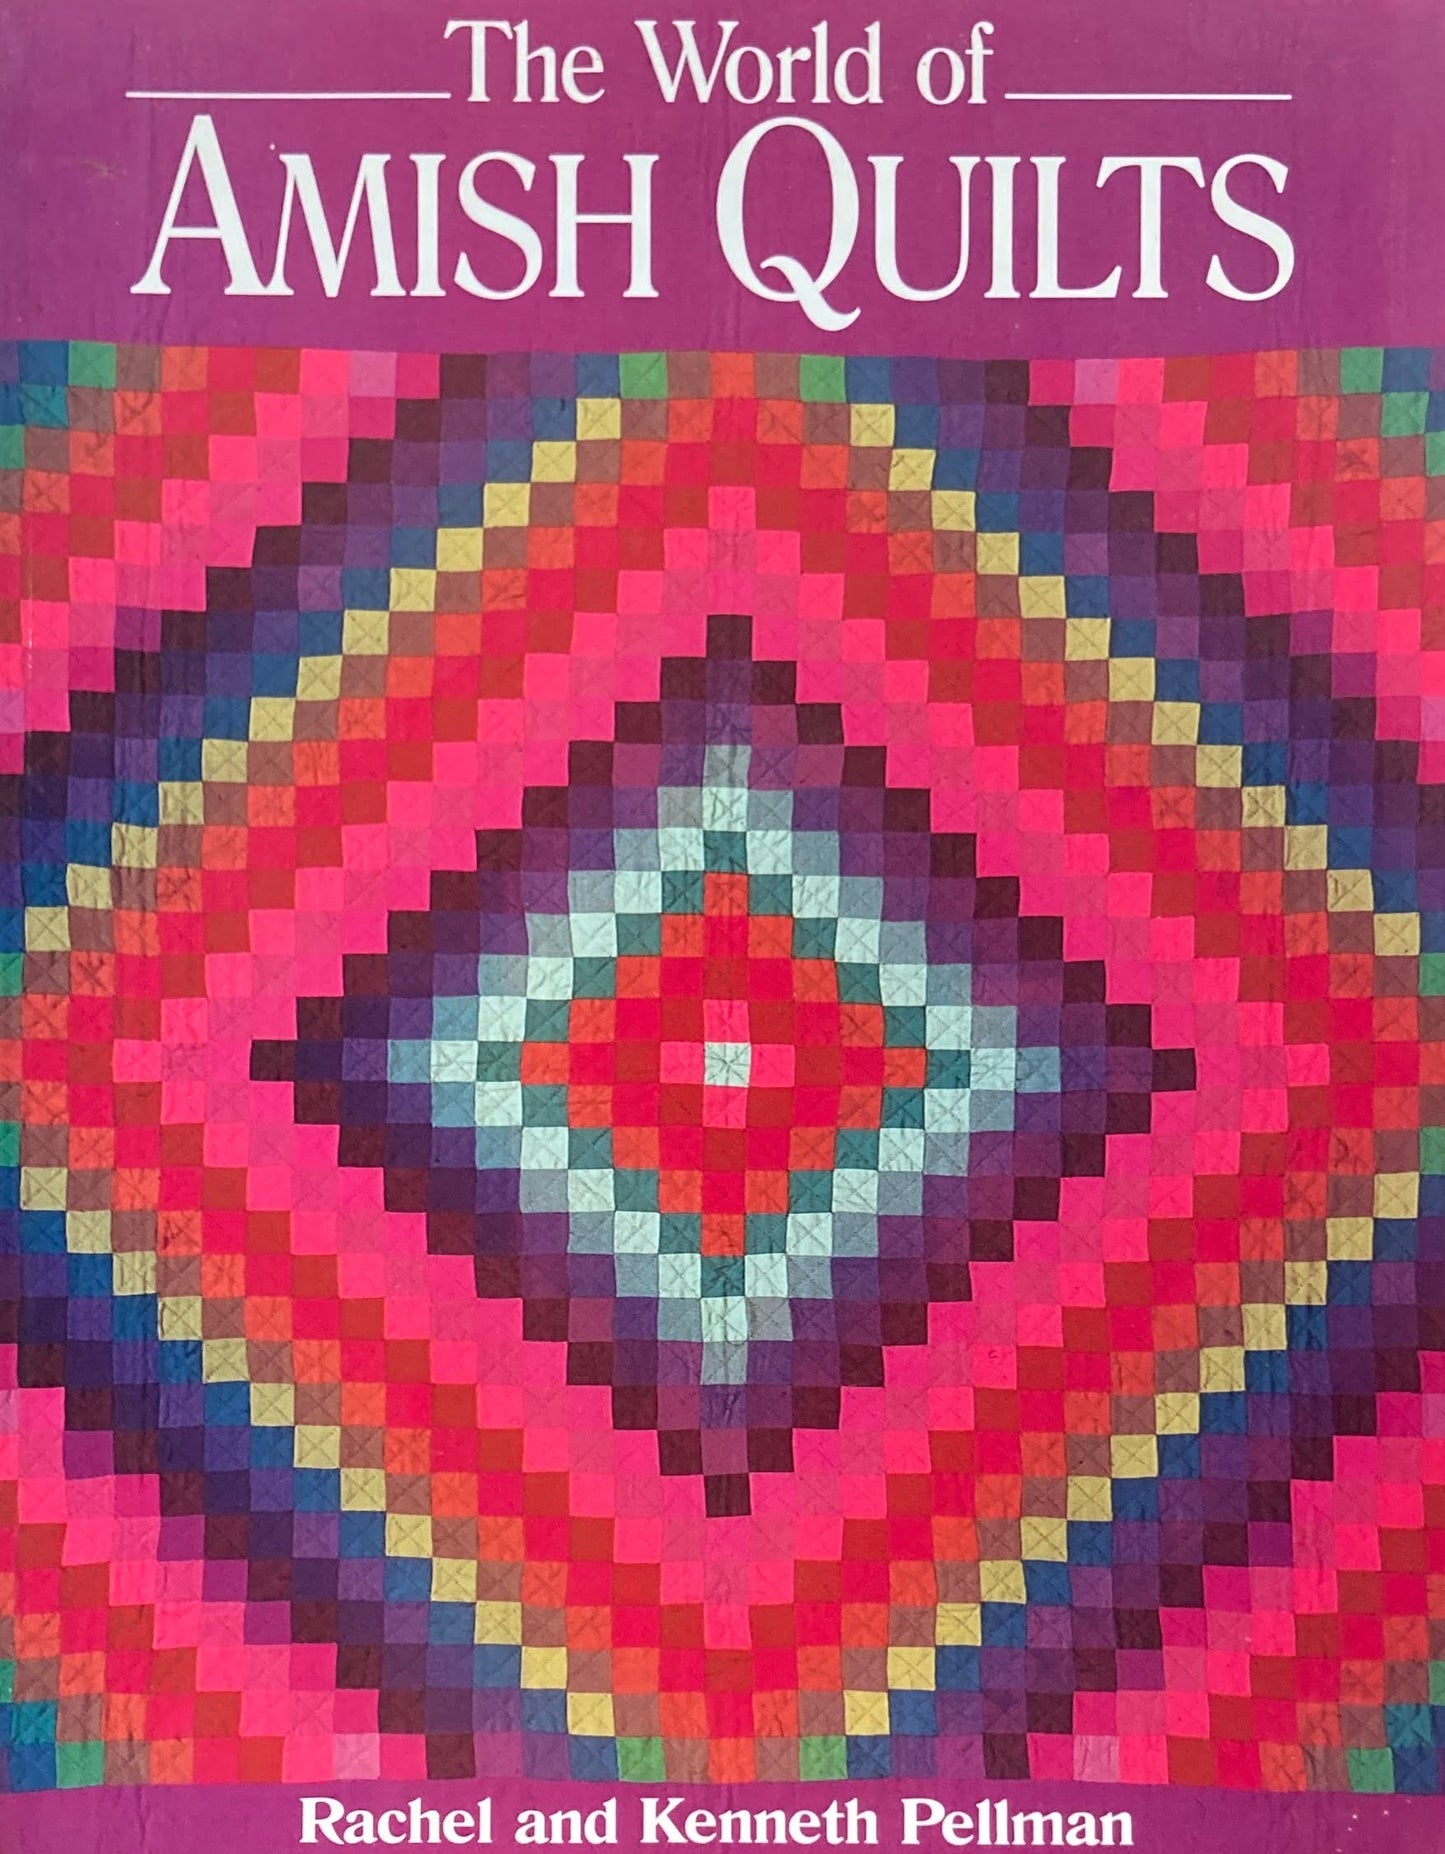 The World of AMISH QUILTS　Rachel and Kenneth Pellman